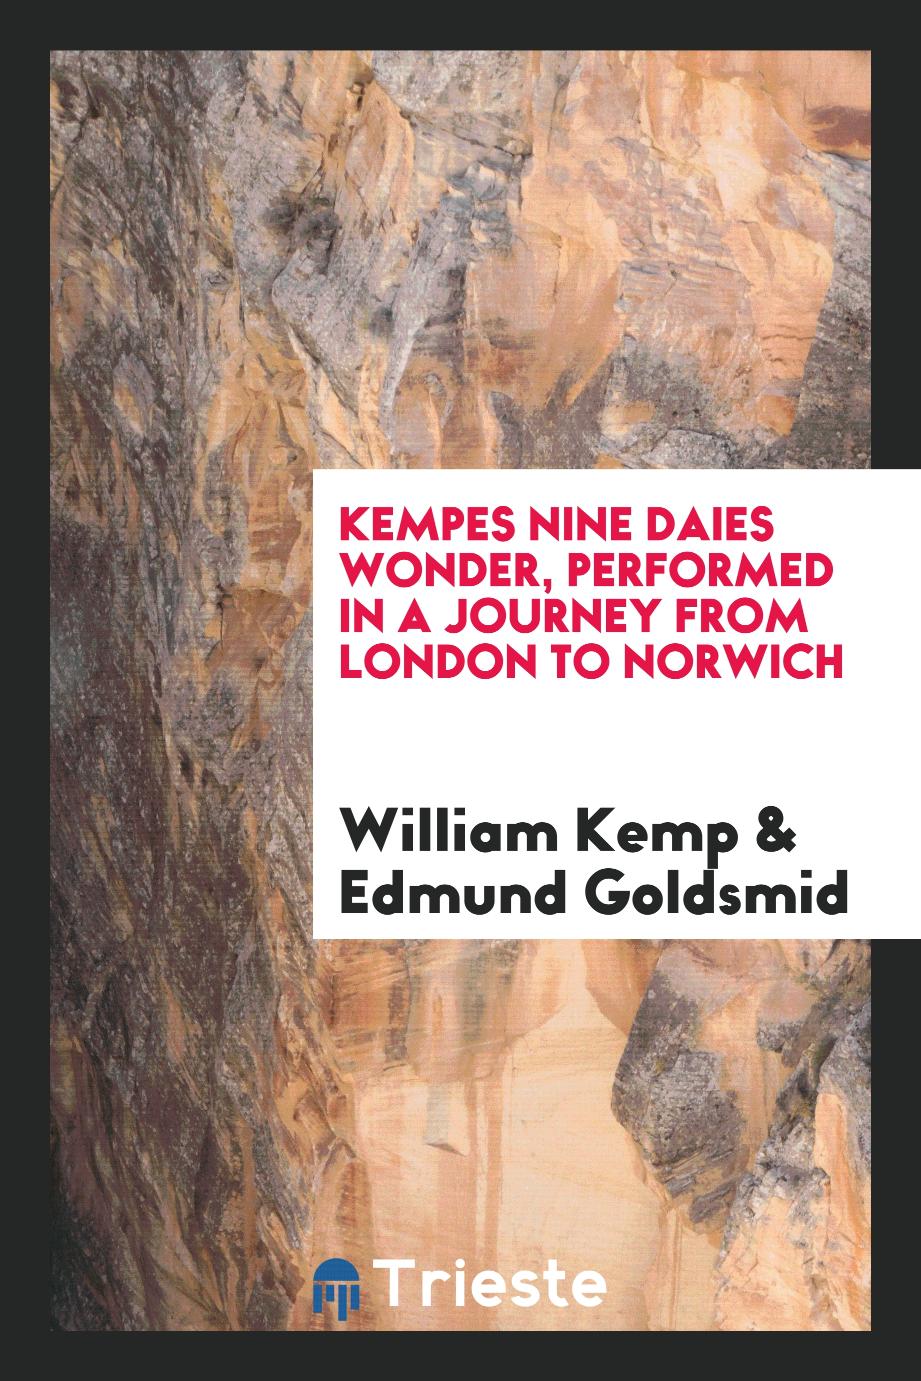 Kempes nine daies wonder, performed in a journey from London to Norwich